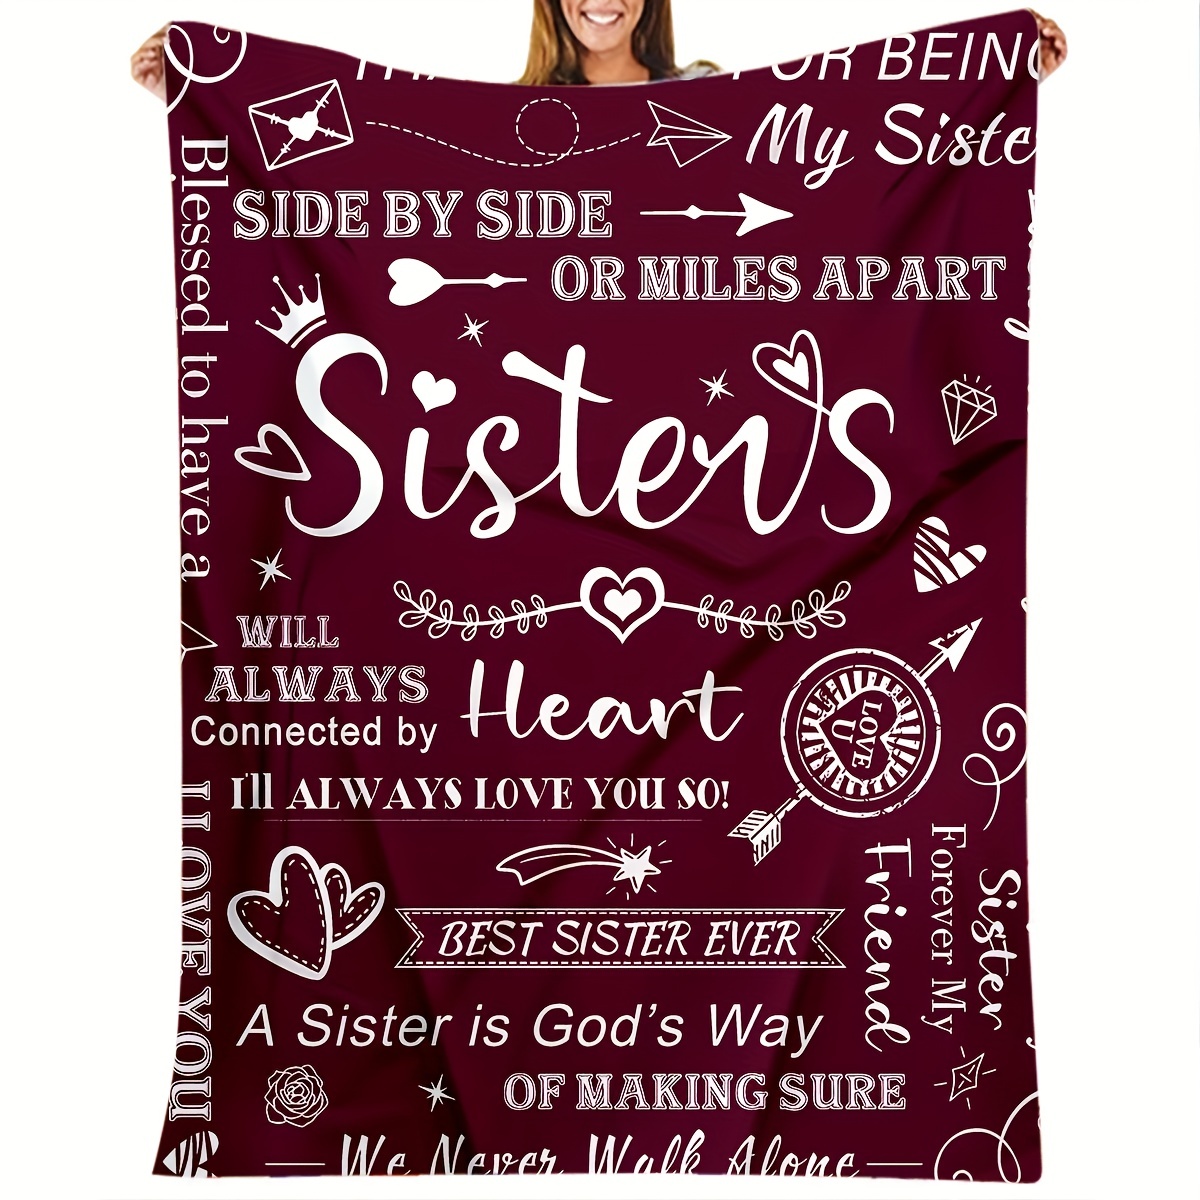 

1pc To Sisters Gift Blanket, Lady's Gift, Sister Gift, Birthday Gift, Christmas Soft Cozy Purple Flannel Blanket